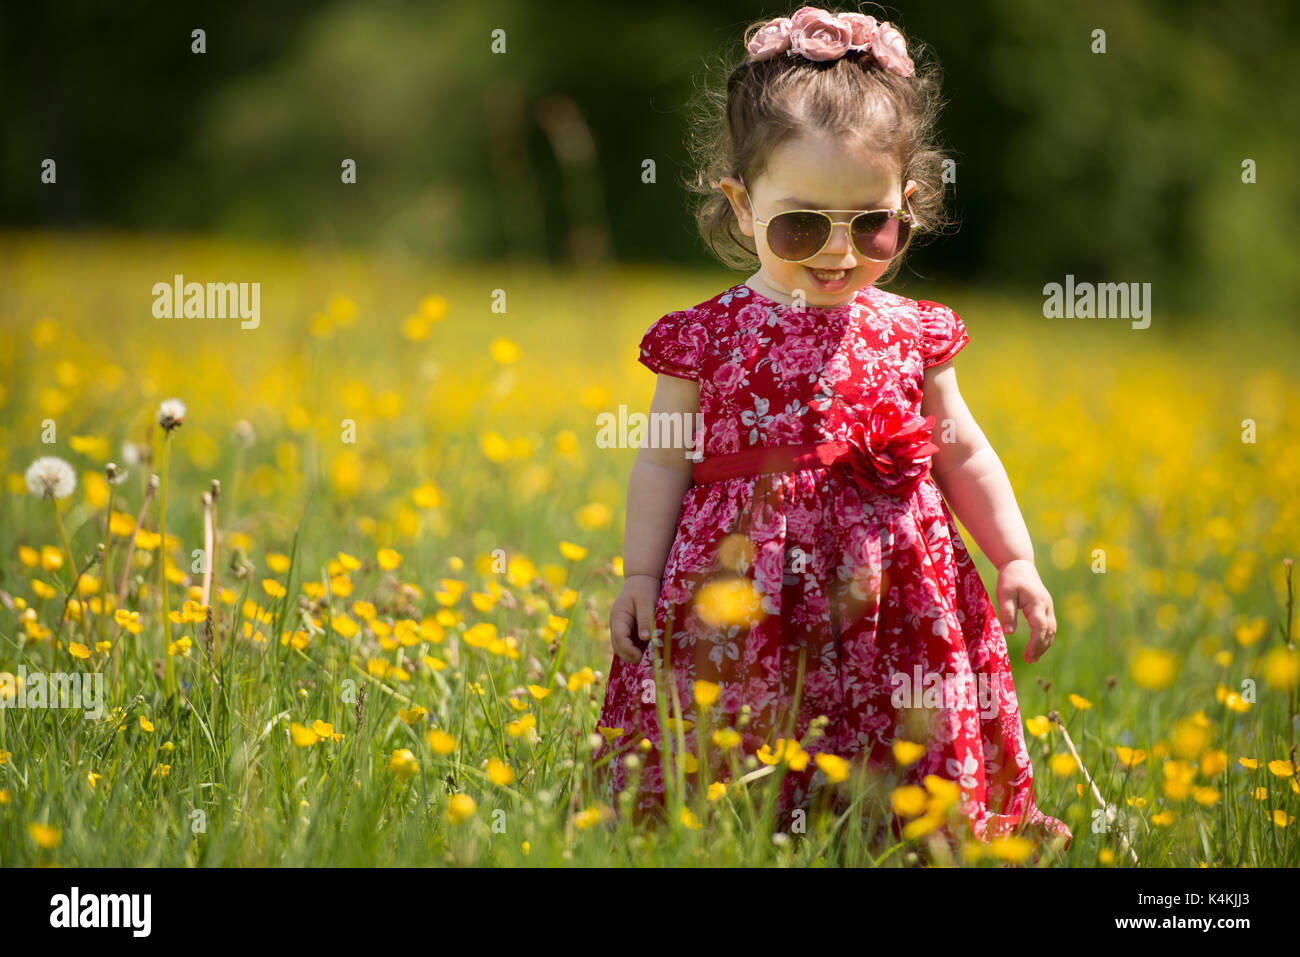 Young girl playing in a field wearing sun glasses and a red dress. credit Lee Ramsden / ALAMY Stock Photo